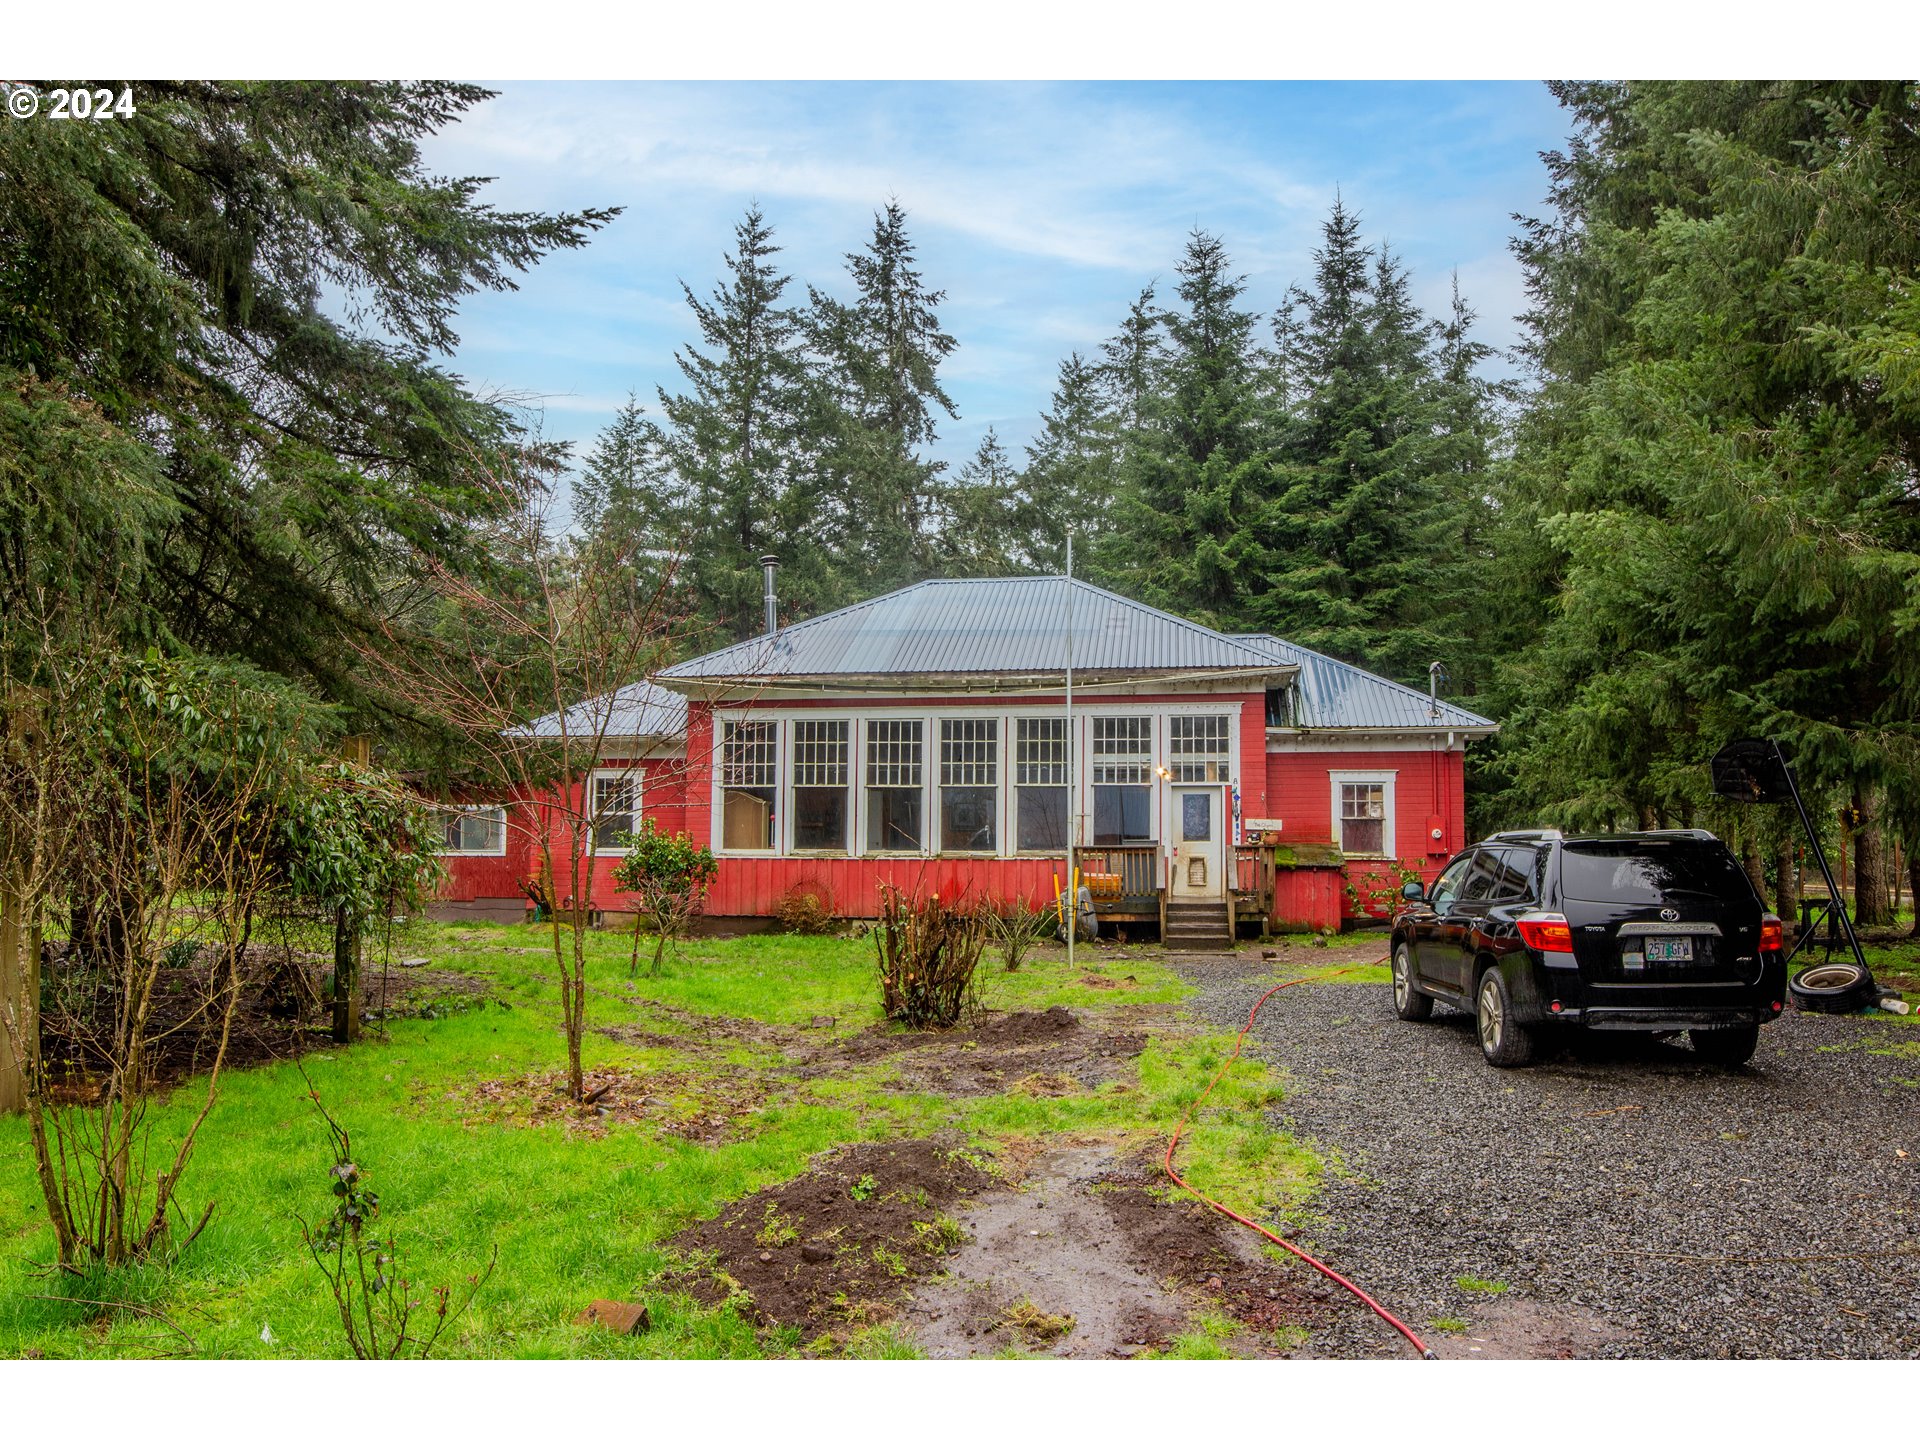 41300 UPPER CALAPOOIA DR, Sweet Home, OR 